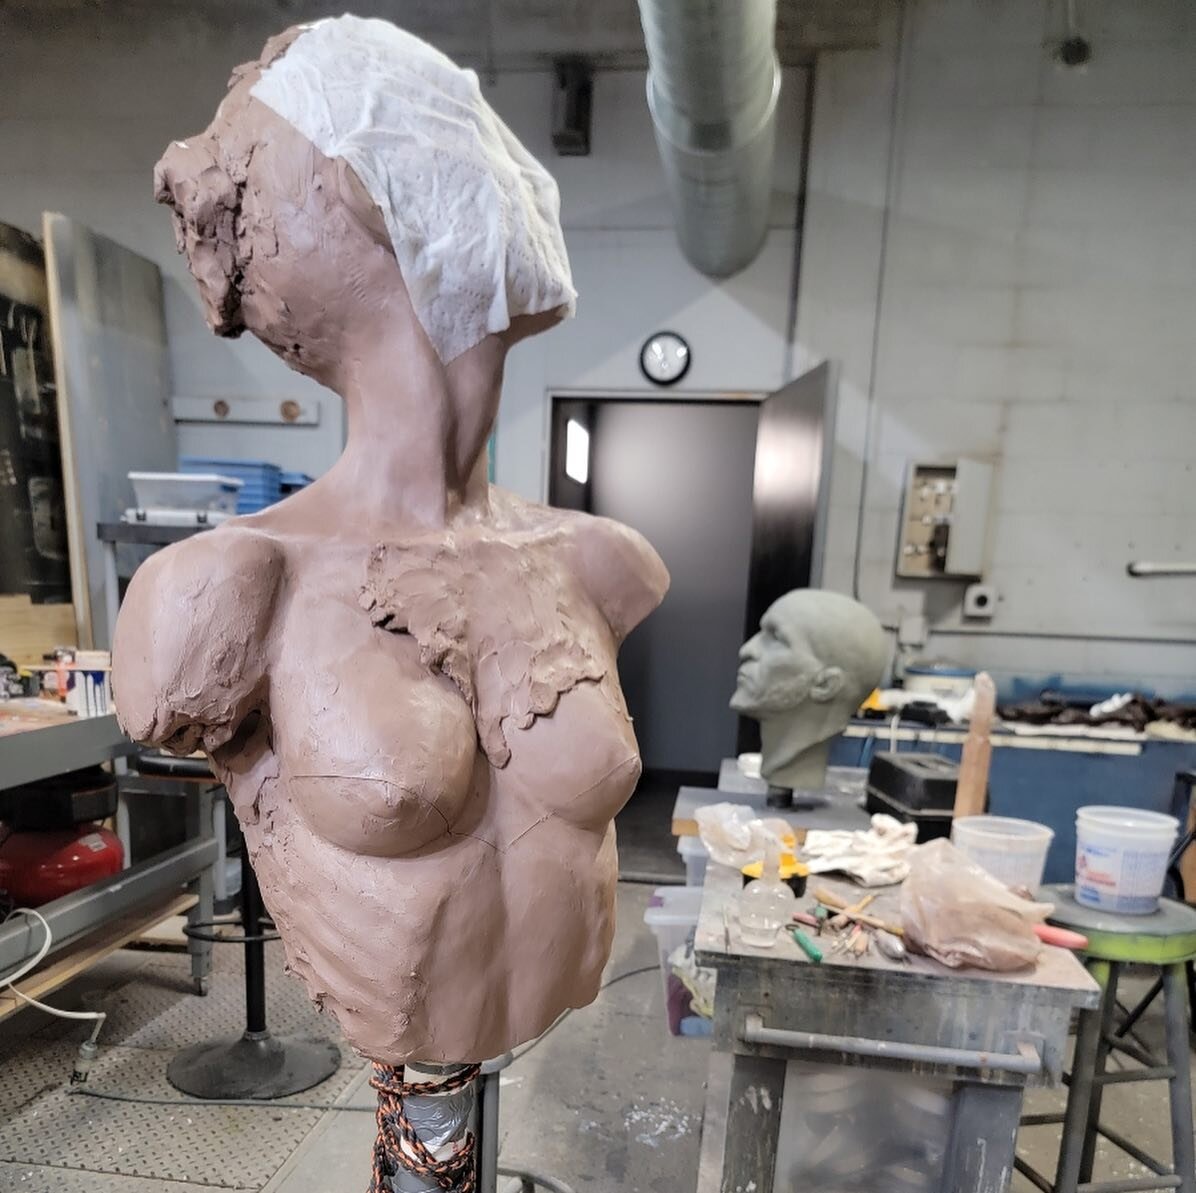 Last day showing at @artwynwood in Palm Beach today with @steidelcontemporary. 

And happy to report that after 200 iterations, I&rsquo;m finally happy with this torso. 

#sculpture 
#art 
#3dart
#3dartist 
#figurativeart 
#artoftheday 
#artistoninst